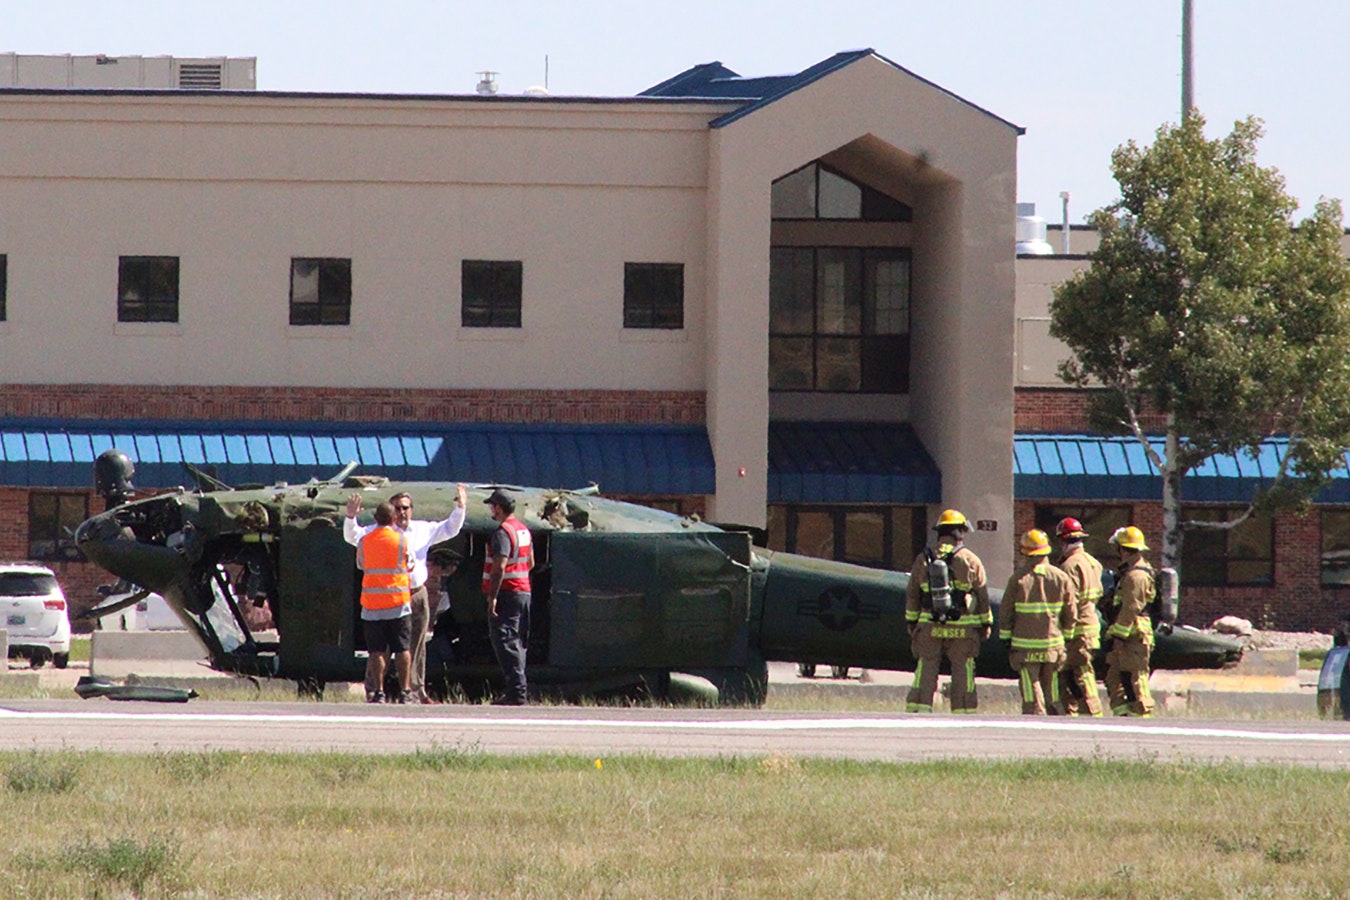 A UH-1 helicopter from F.E. Warren Air Force Base flipped and crashed at the Cheyenne Regional Airport on Wednesday morning. A witness told Cowboy State Daily he watched those on board get out and it doesn't appear anyone was seriously hurt.